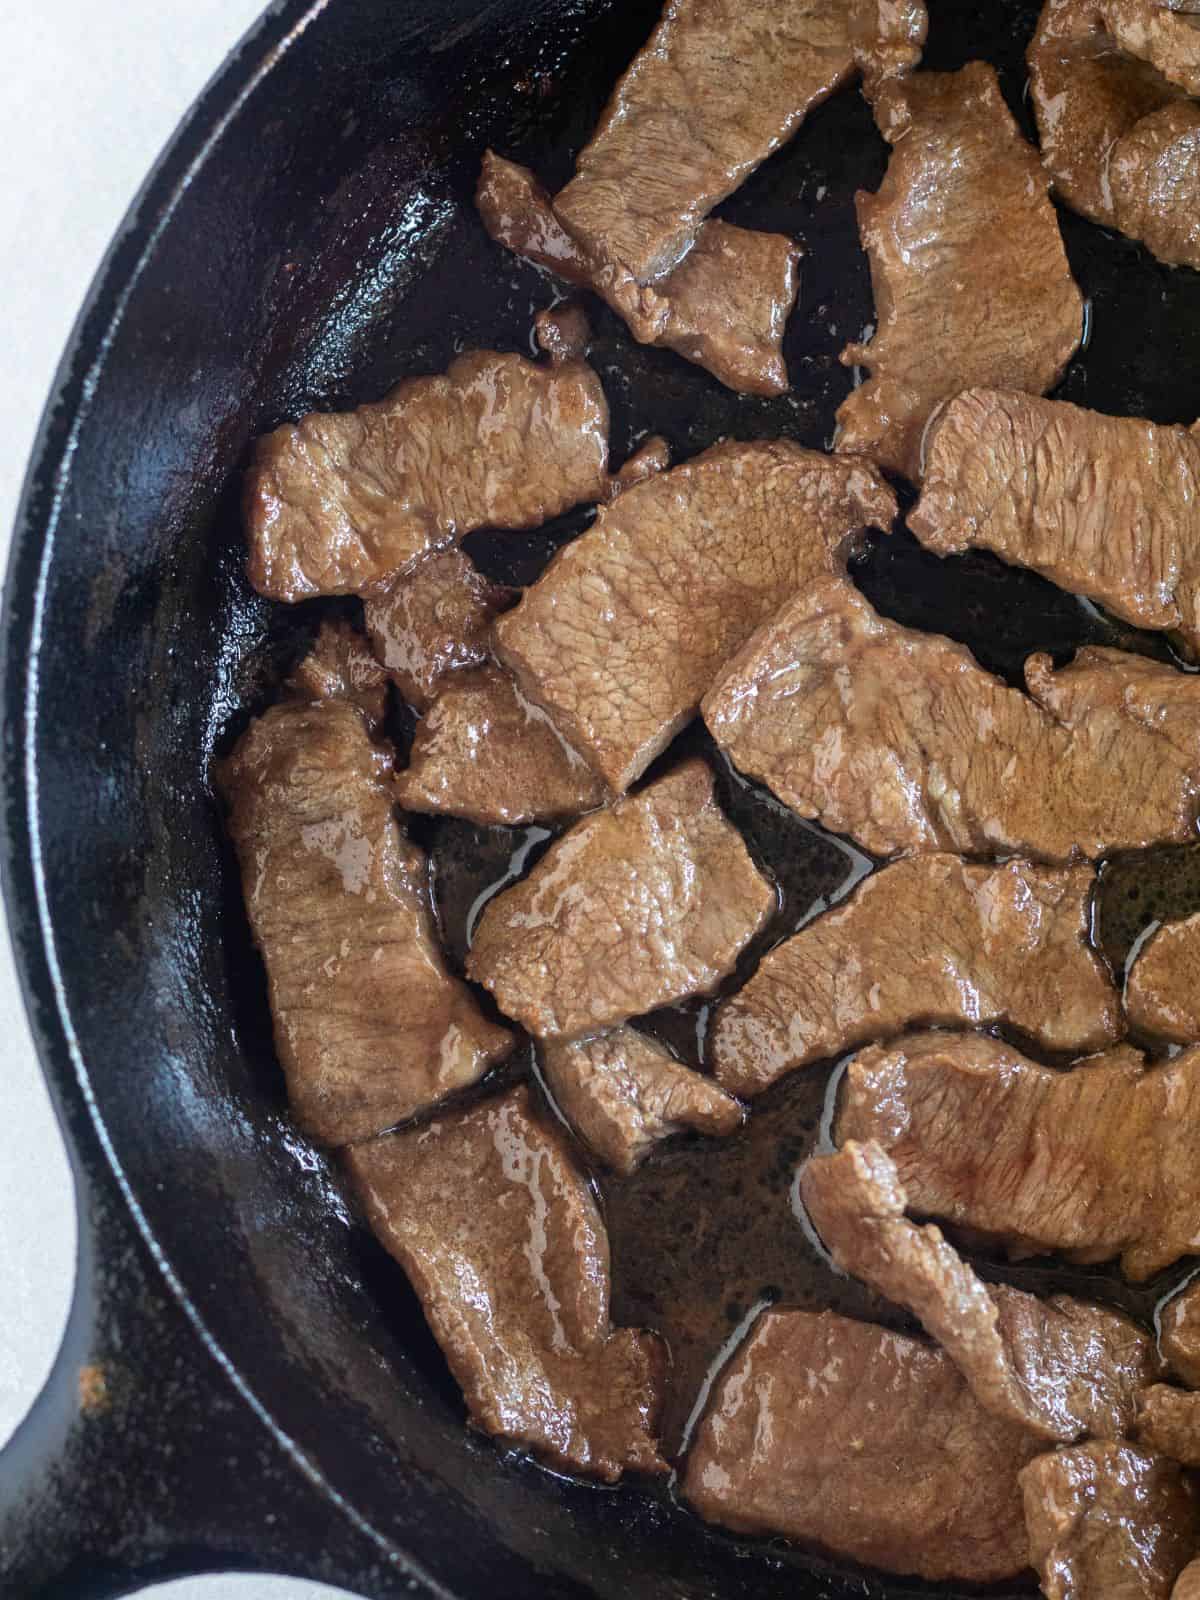 Cooked steak in a cast-iron skillet.